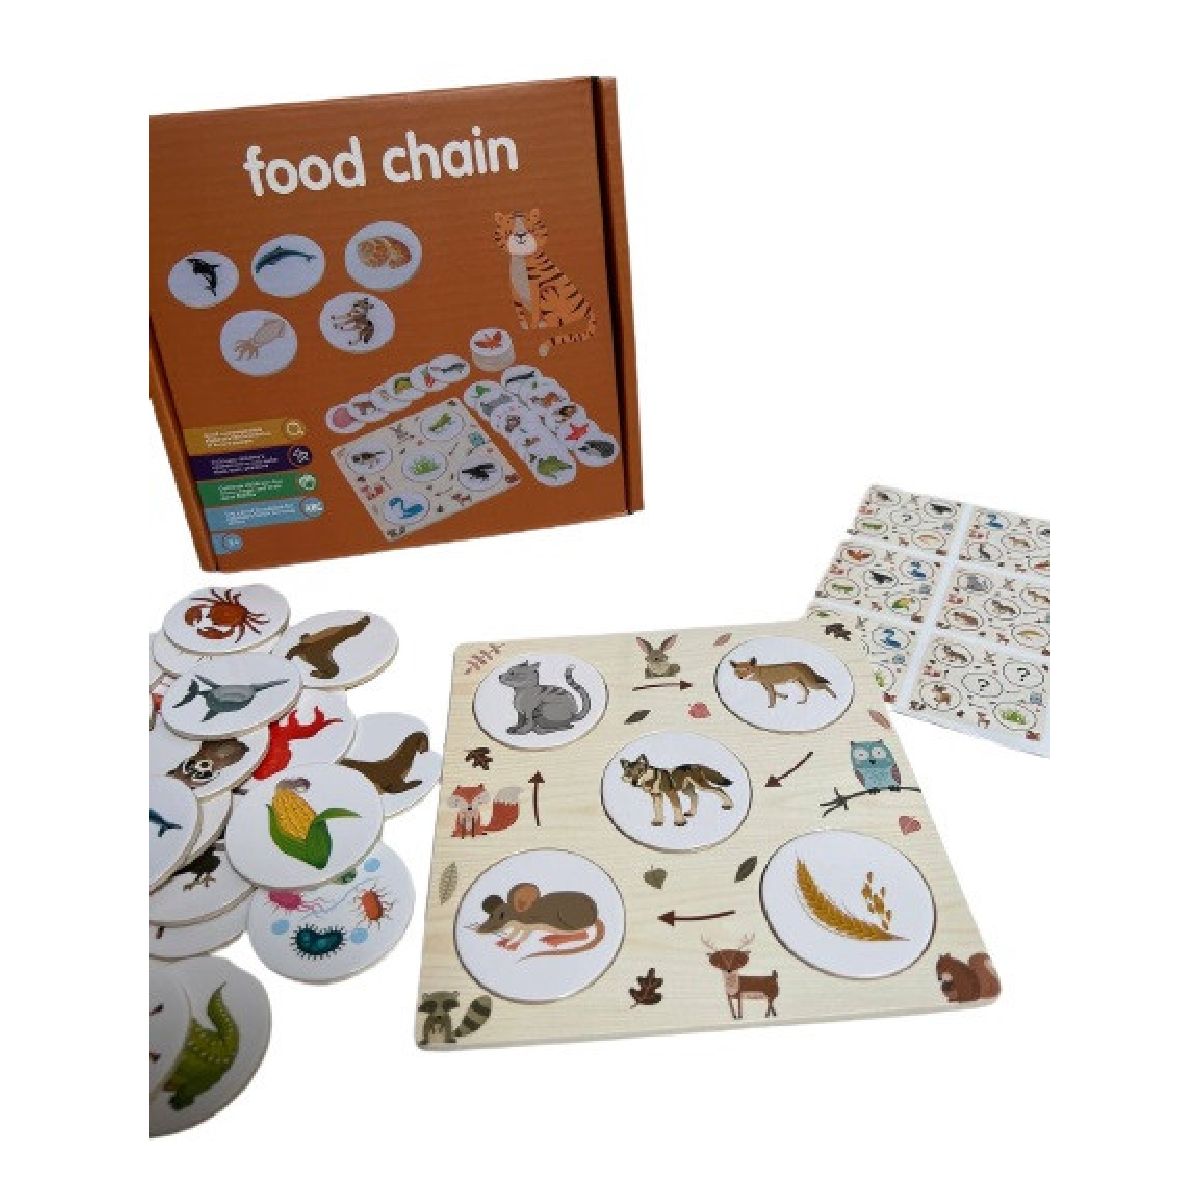 Food chain / Food Cycle puzzle